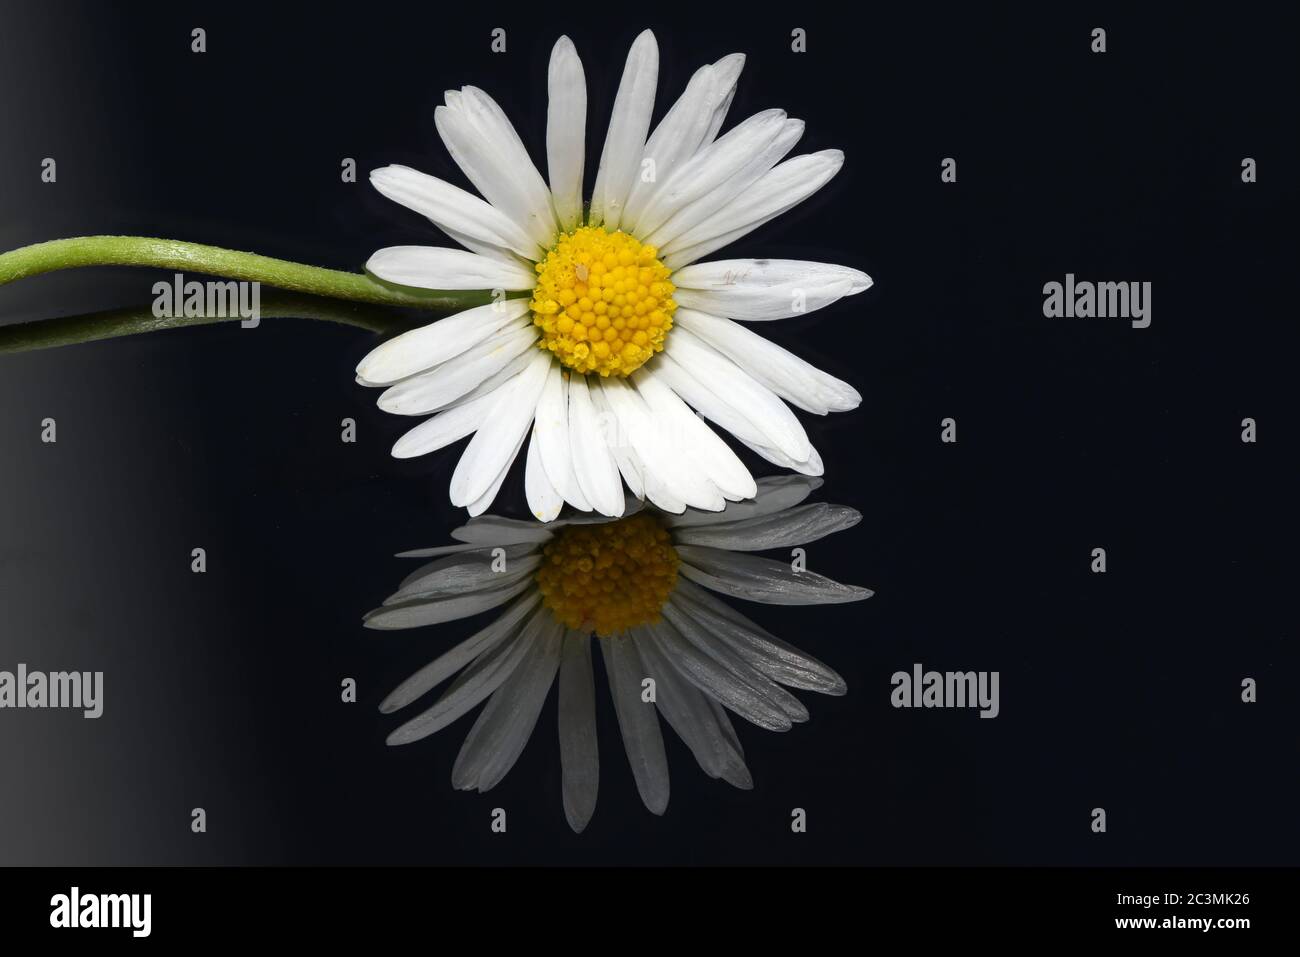 Close-up of daisy blossom with mirror image on a dark glass plate Stock Photo